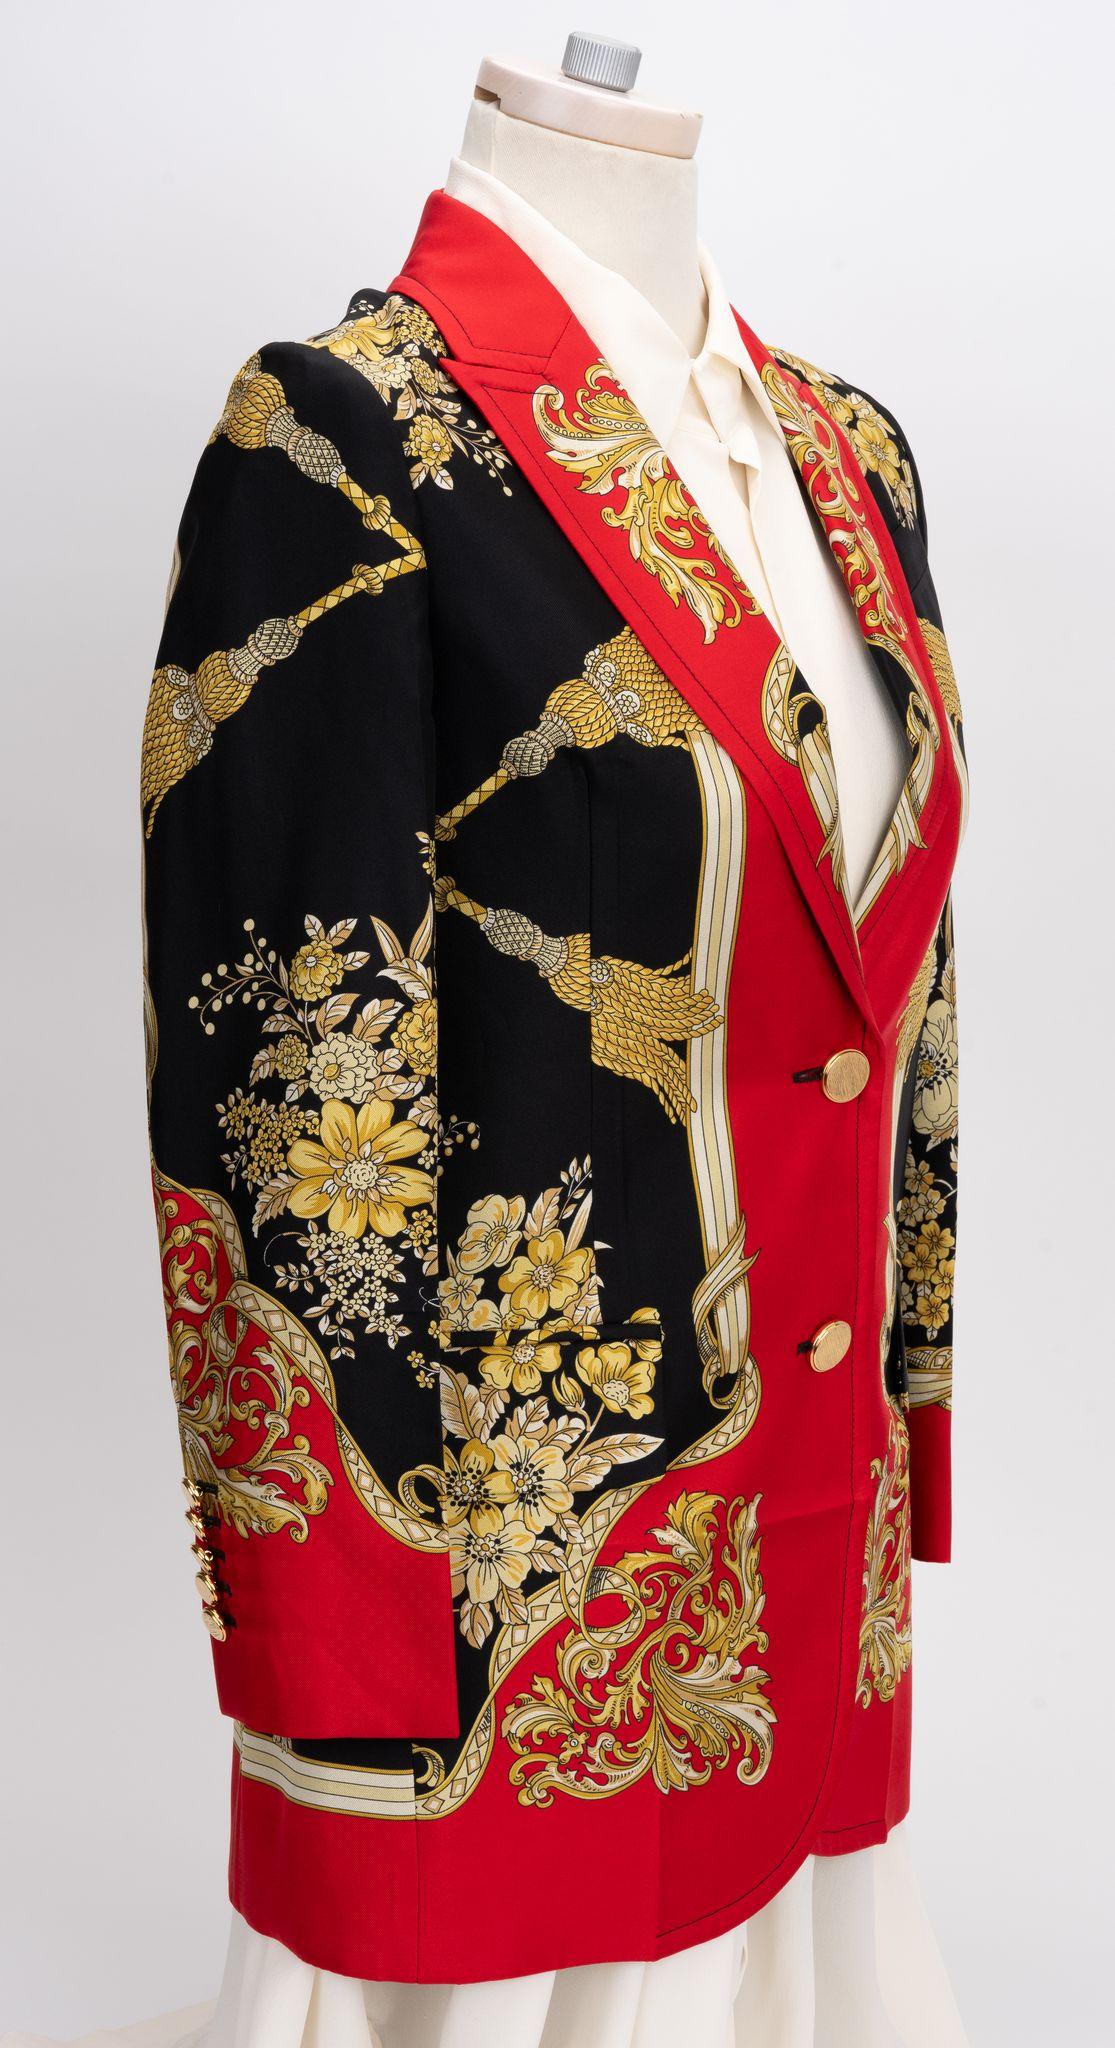 Gucci brand new Floral Tassel Foulard Baroque blazer with peak lapels. Fastened with buttons and two flap pockets and one slip pocket on the front and one vent on the back.
Size Italian 36.
Measurements : shoulder 15.5